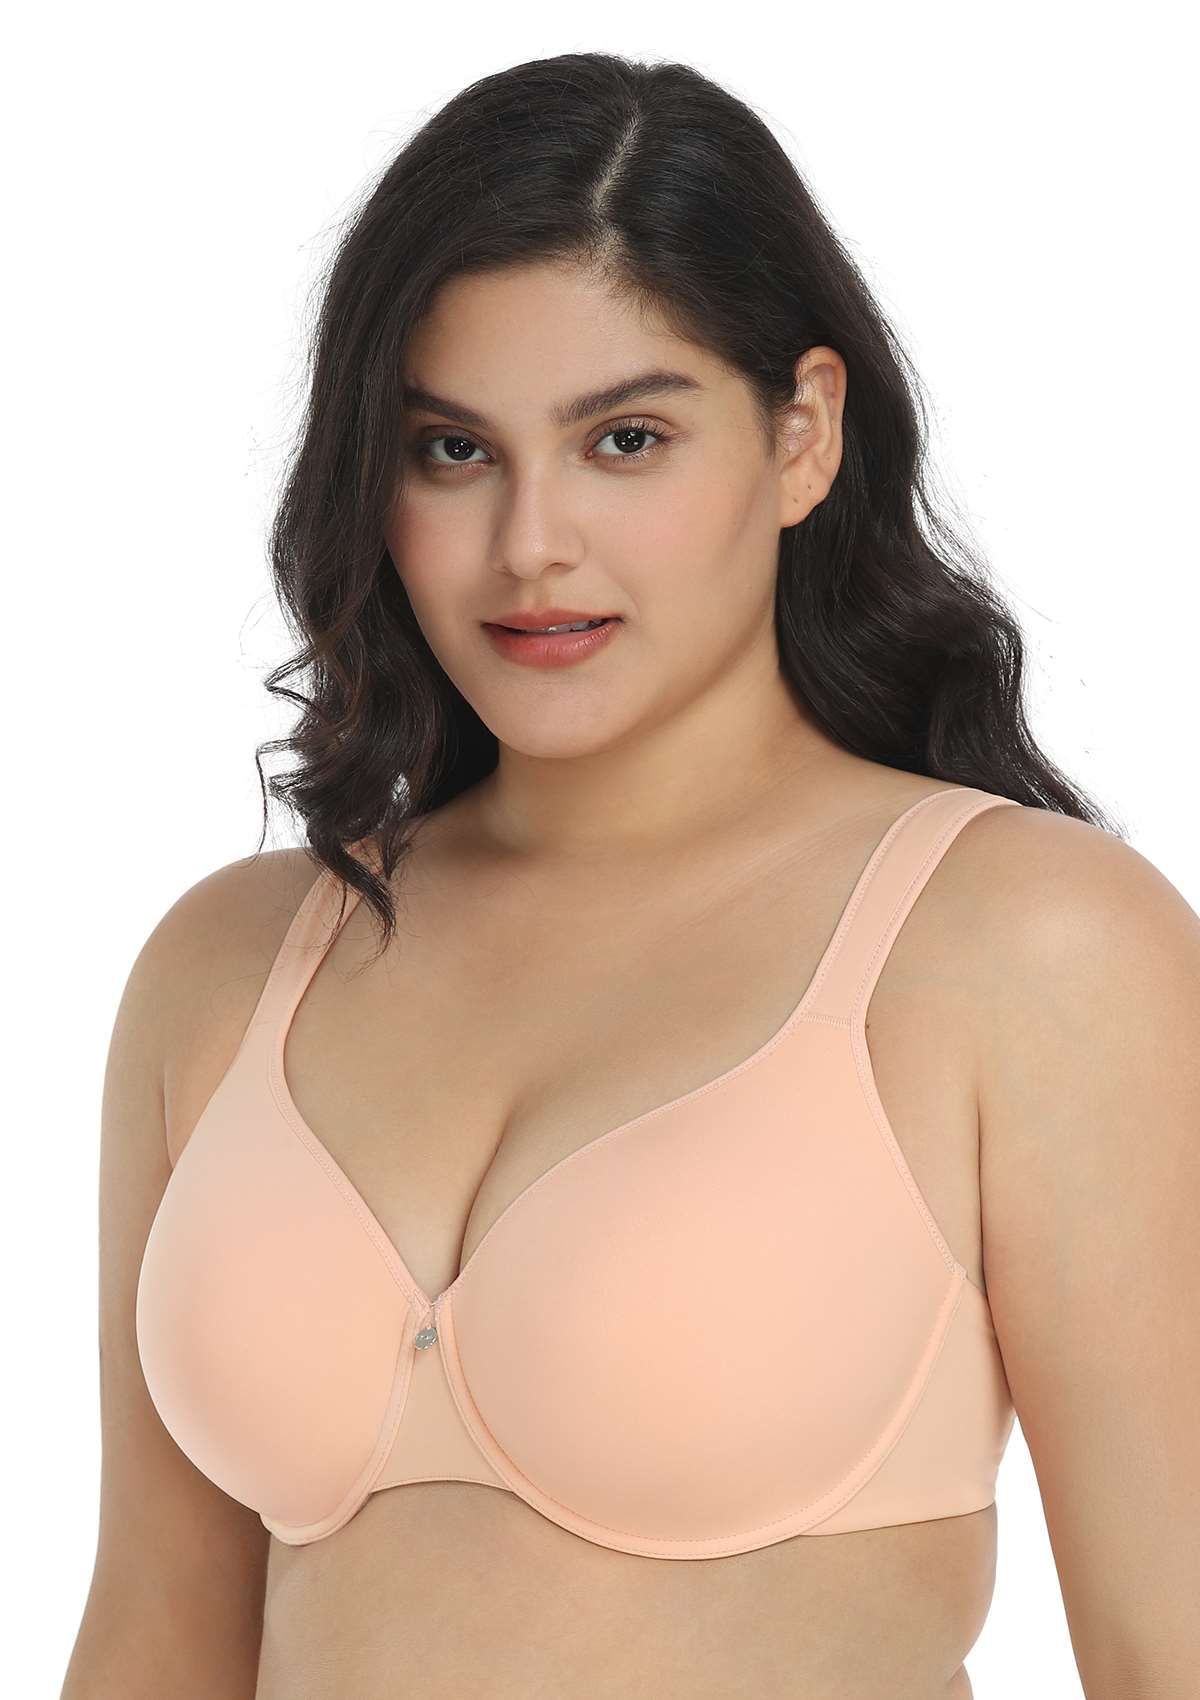 HSIA Patricia Smooth Classic T-shirt Lightly Padded Minimizer Bra - Light Pink / 42 / D